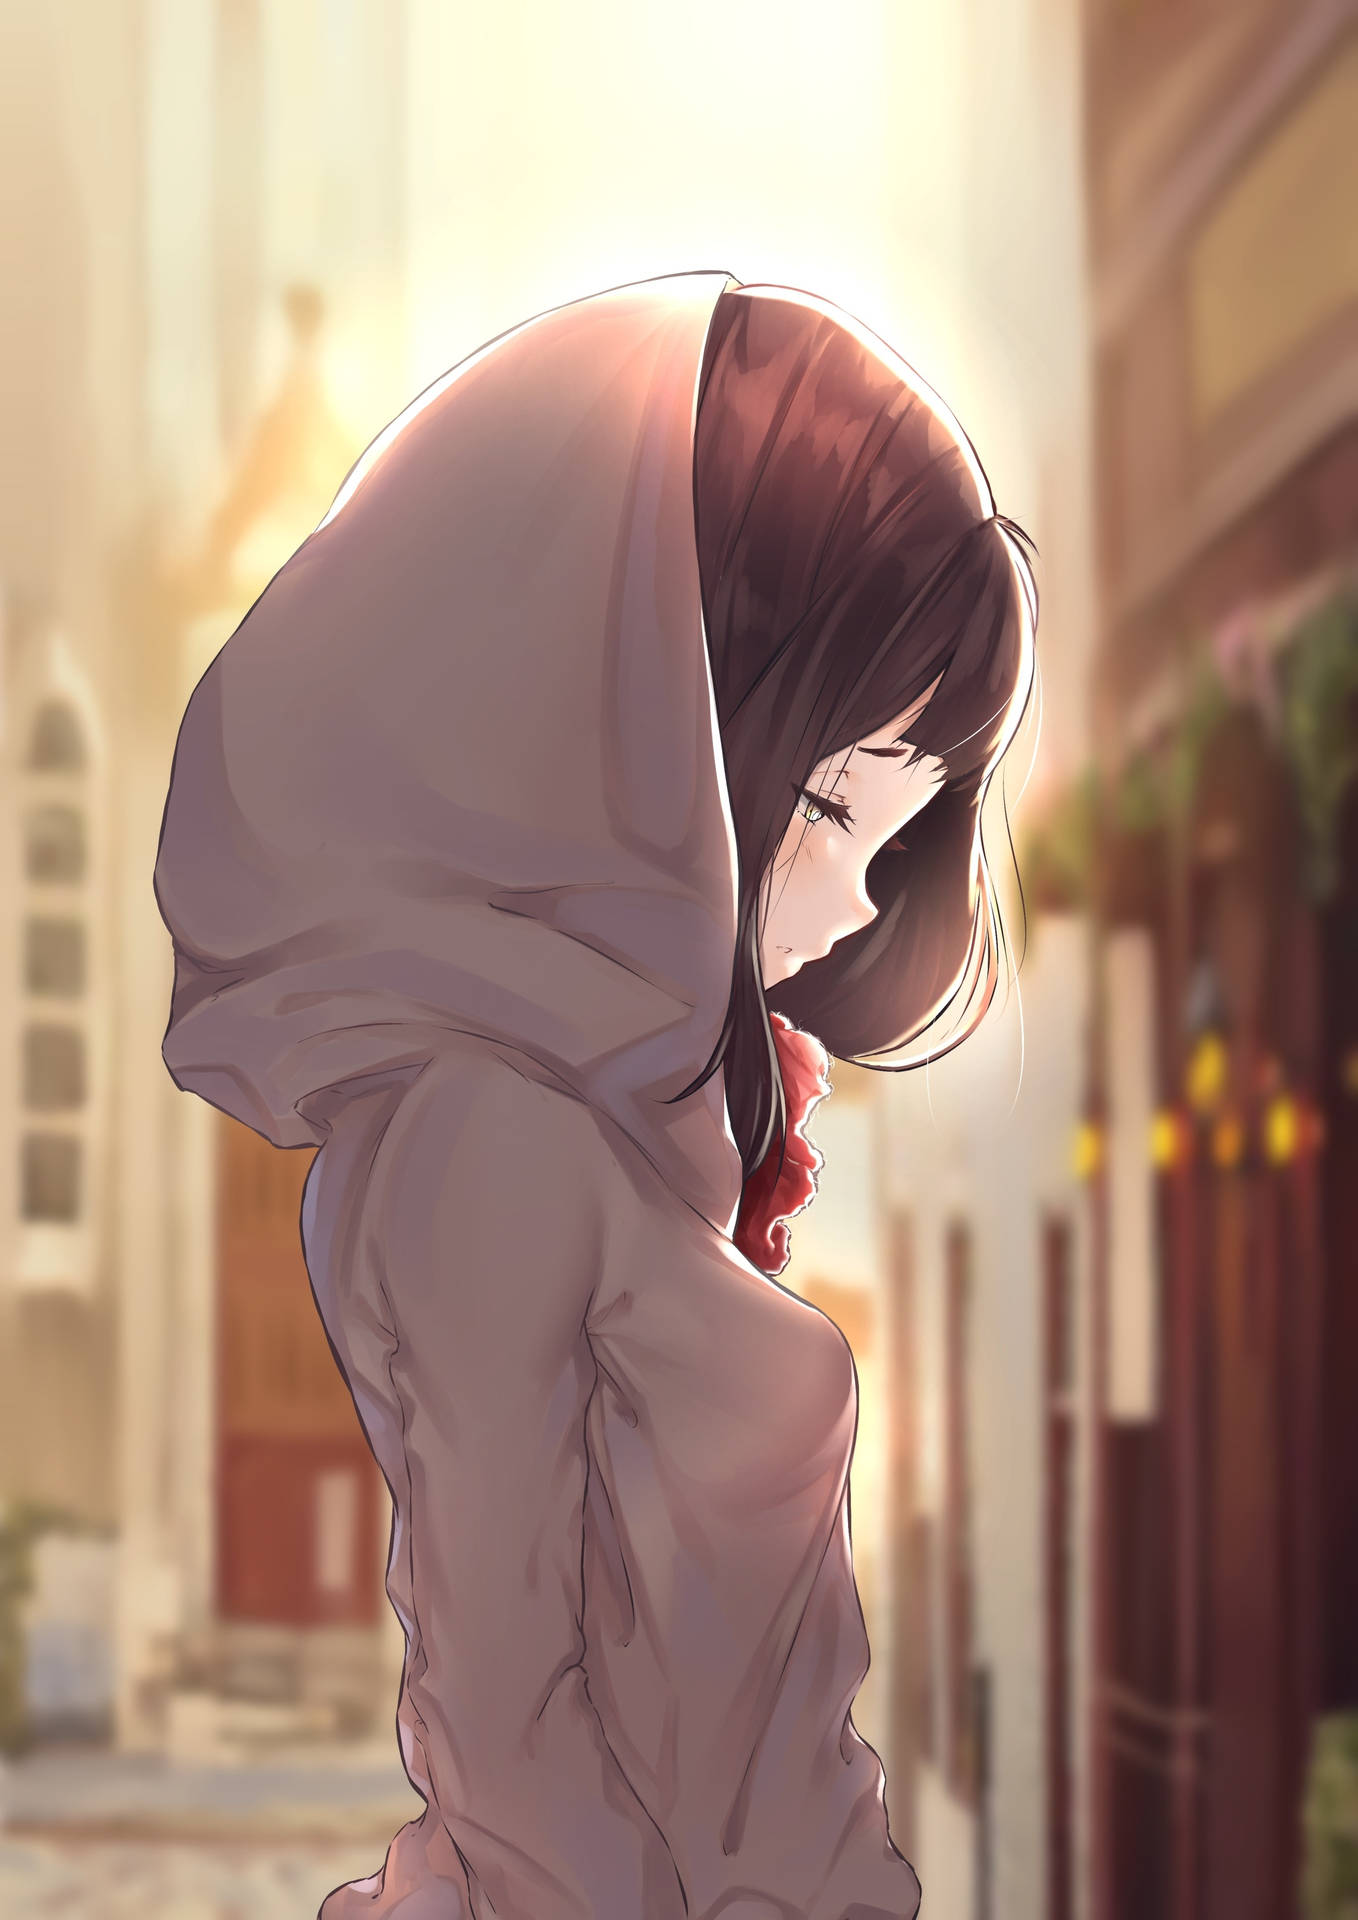 Lonely Anime Girl Hoodie Background